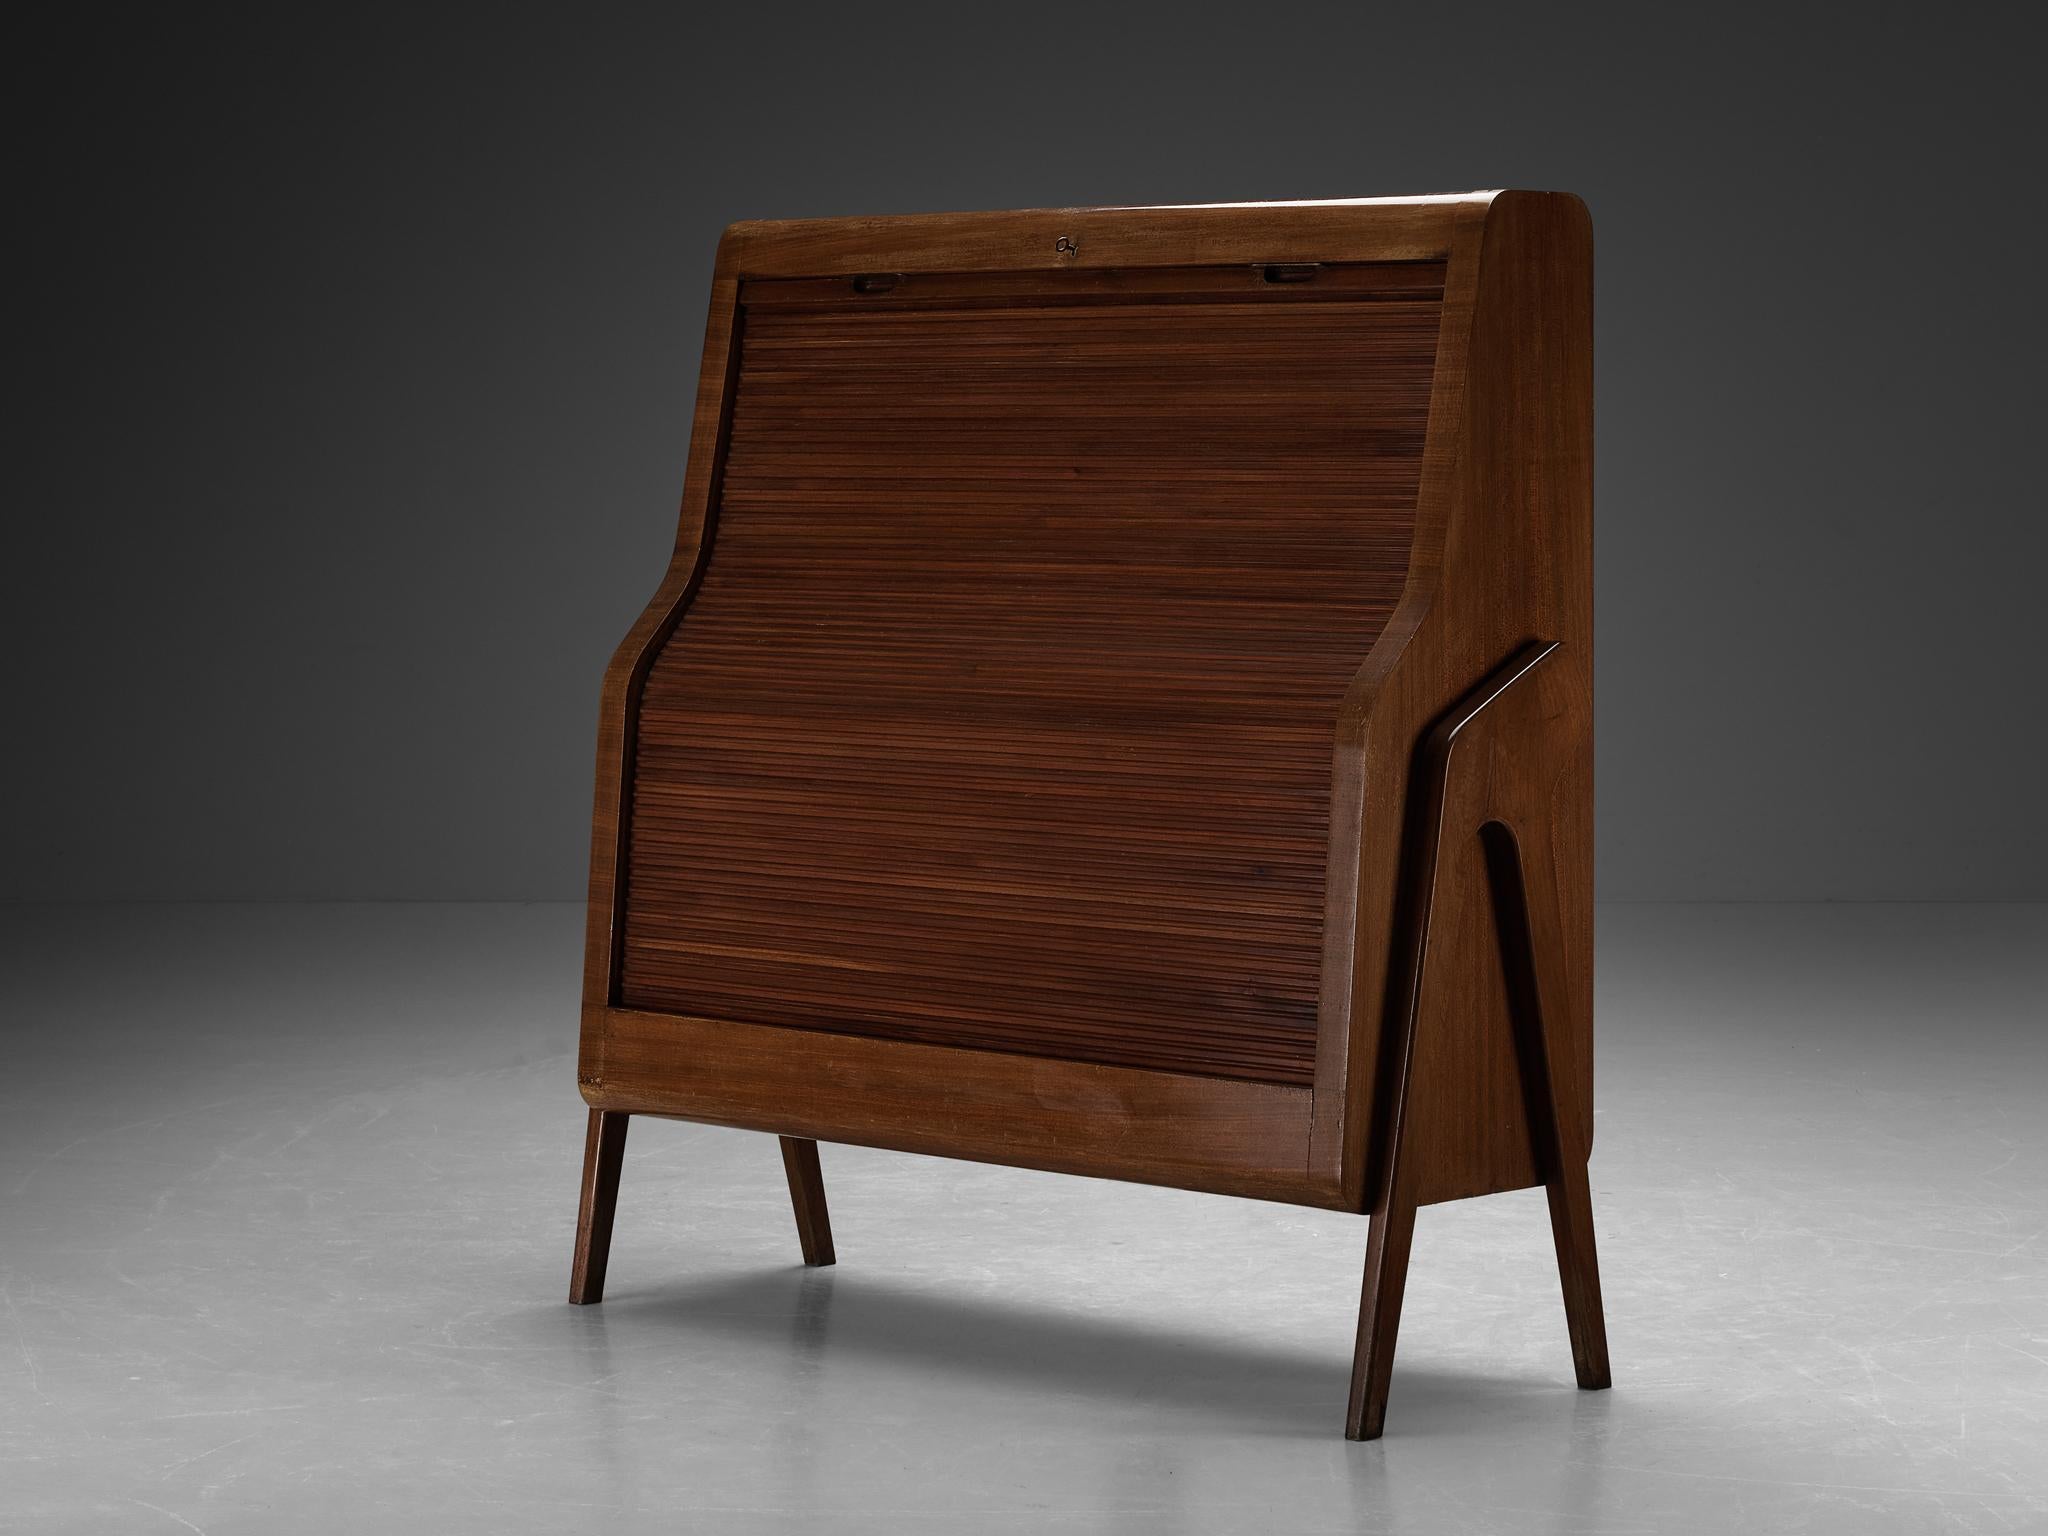 Bar cabinet, mahogany, glass, acrylic, Italy, 1950s

A gracious bar cabinet hailing from Italy and dating back to the mid-century period. The design features a tambour rolled-door that can be moved all the way down, revealing a sophisticated